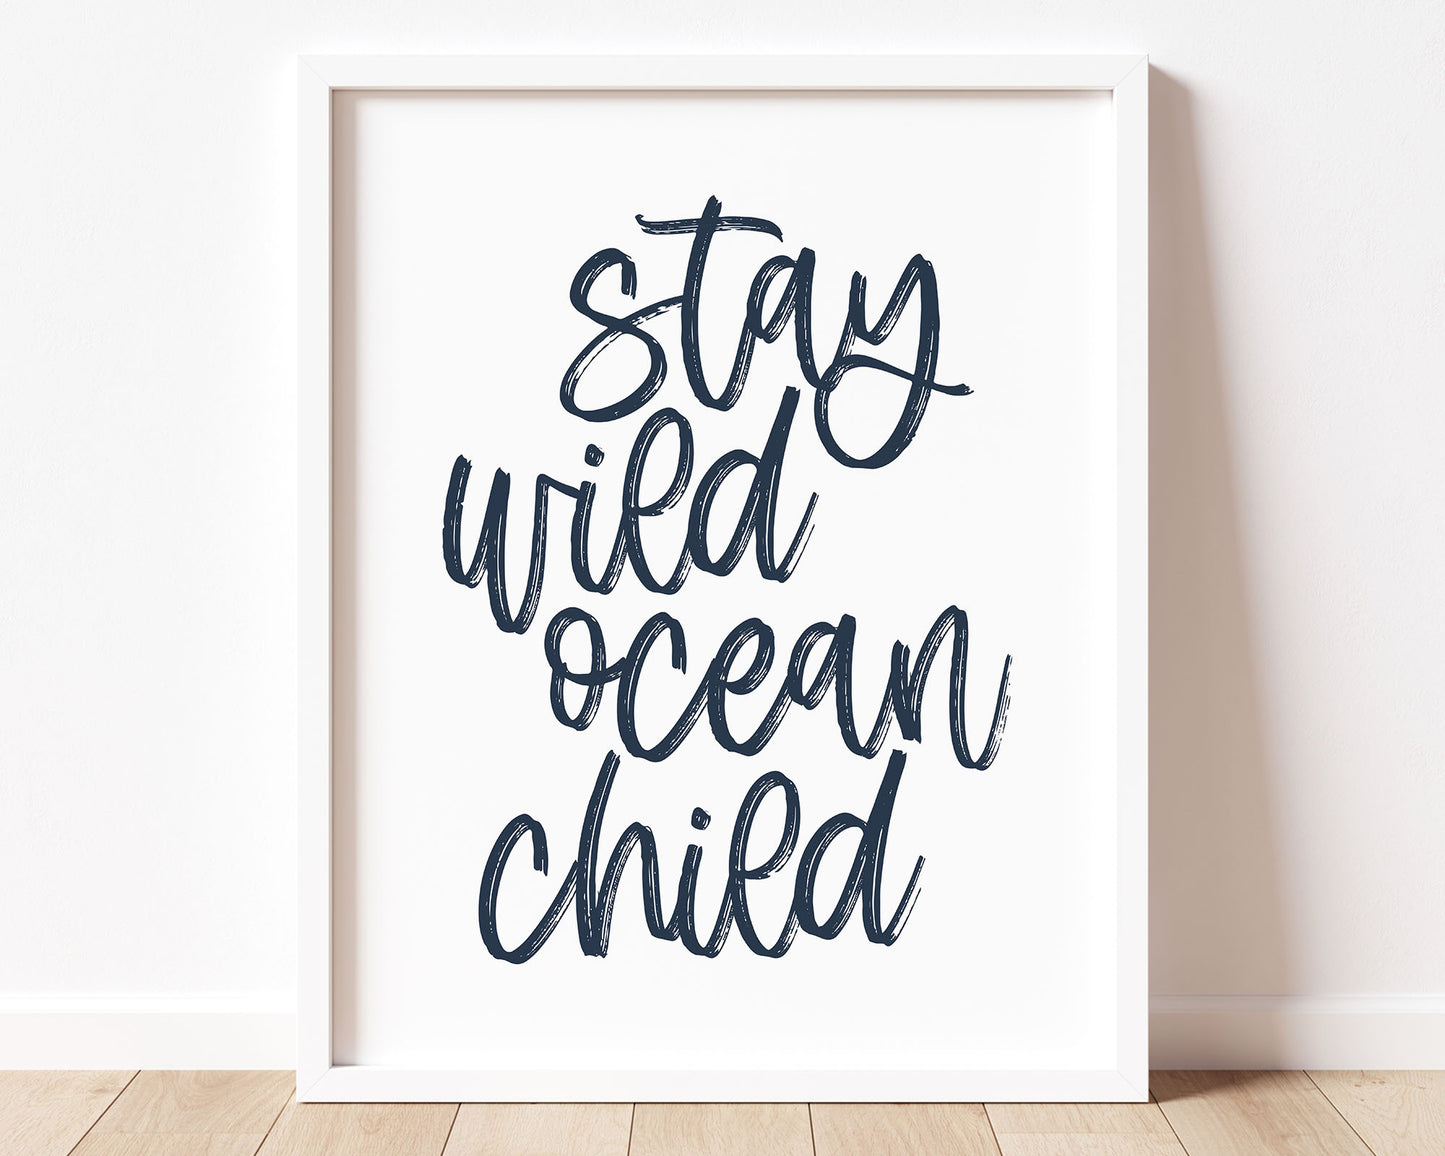 Neutral Tan Stay Wild Ocean Child Printable Wall Art featuring a textured brush style cursive lettered quote in a navy blue color.